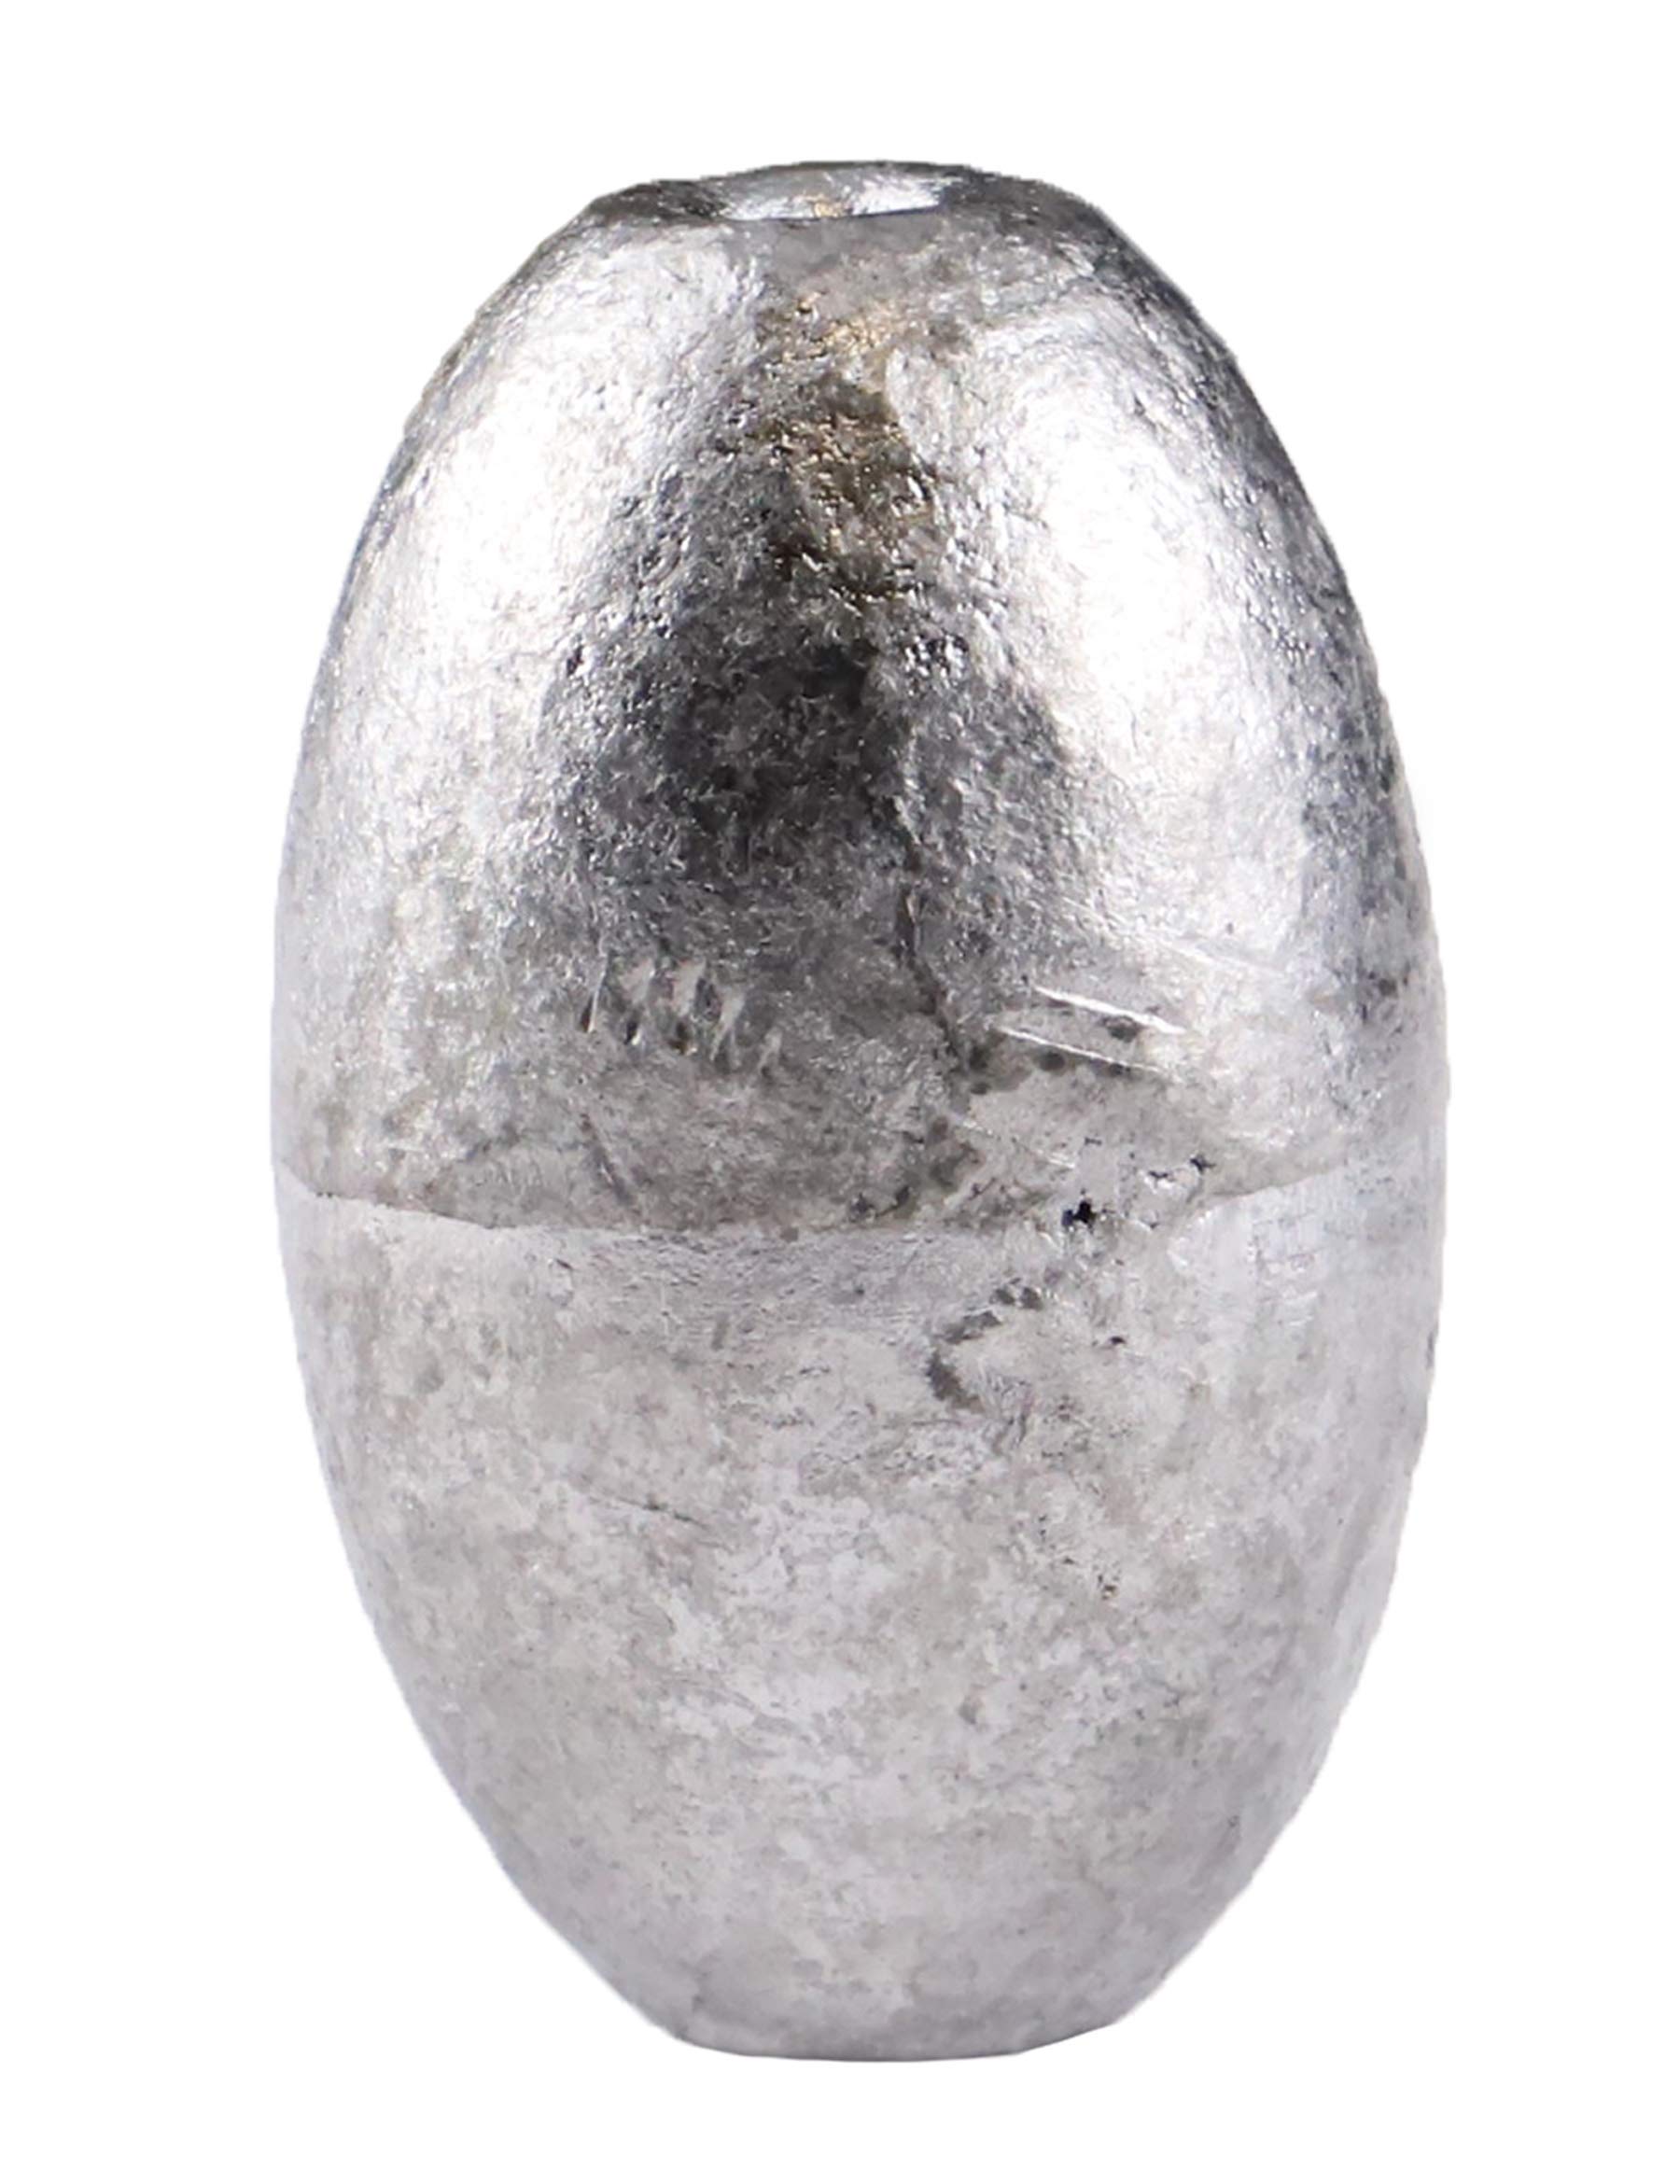 Avlcoaky Egg Sinkers Weights Fishing Weights Saltwater Oval Shaped Sinkers  for Fishing Line Catfishing Bottom Fishing